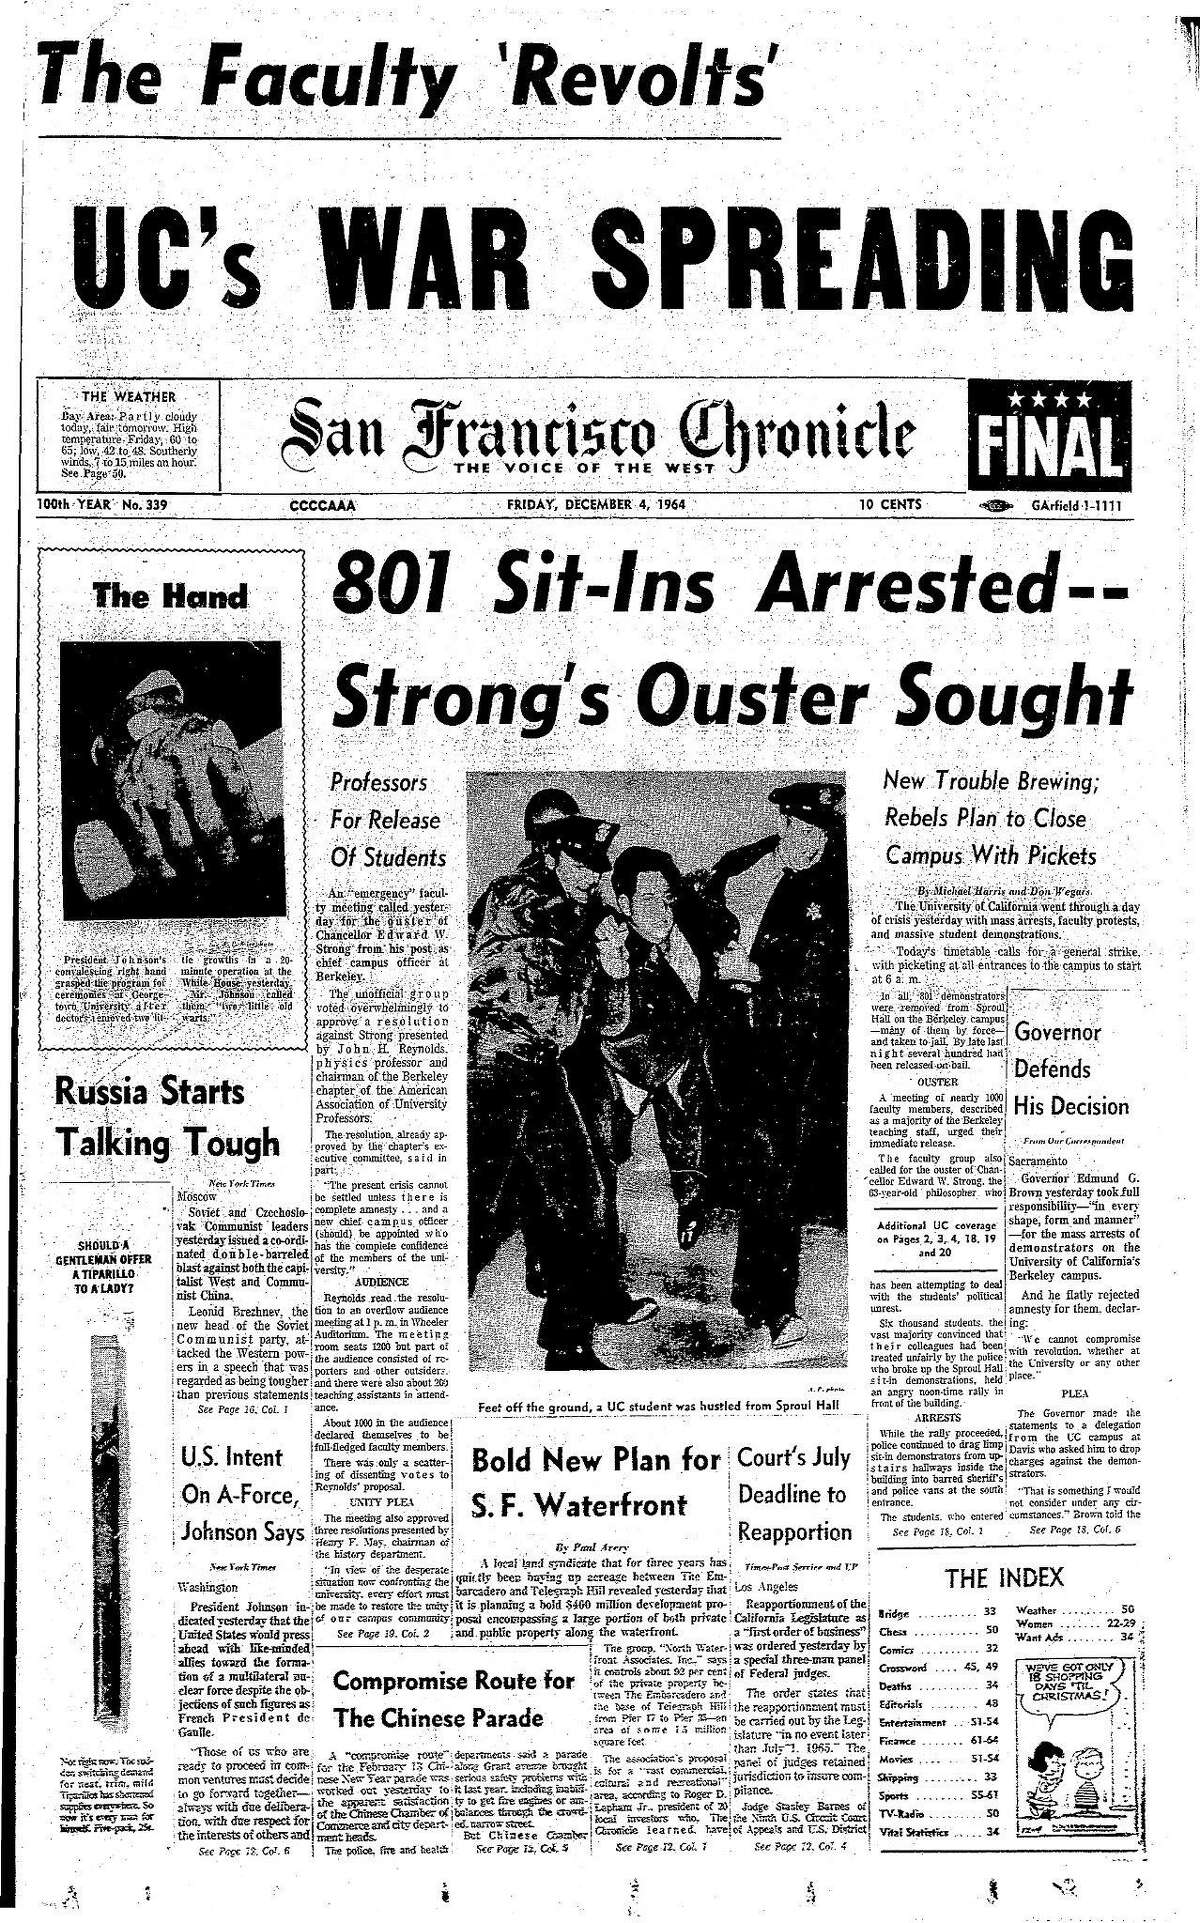 Historic Chronicle Front Page December 04, 1964 Over 800 students arrested at University of California at Berkeley during free speech demonstrations Chron365, Chroncover